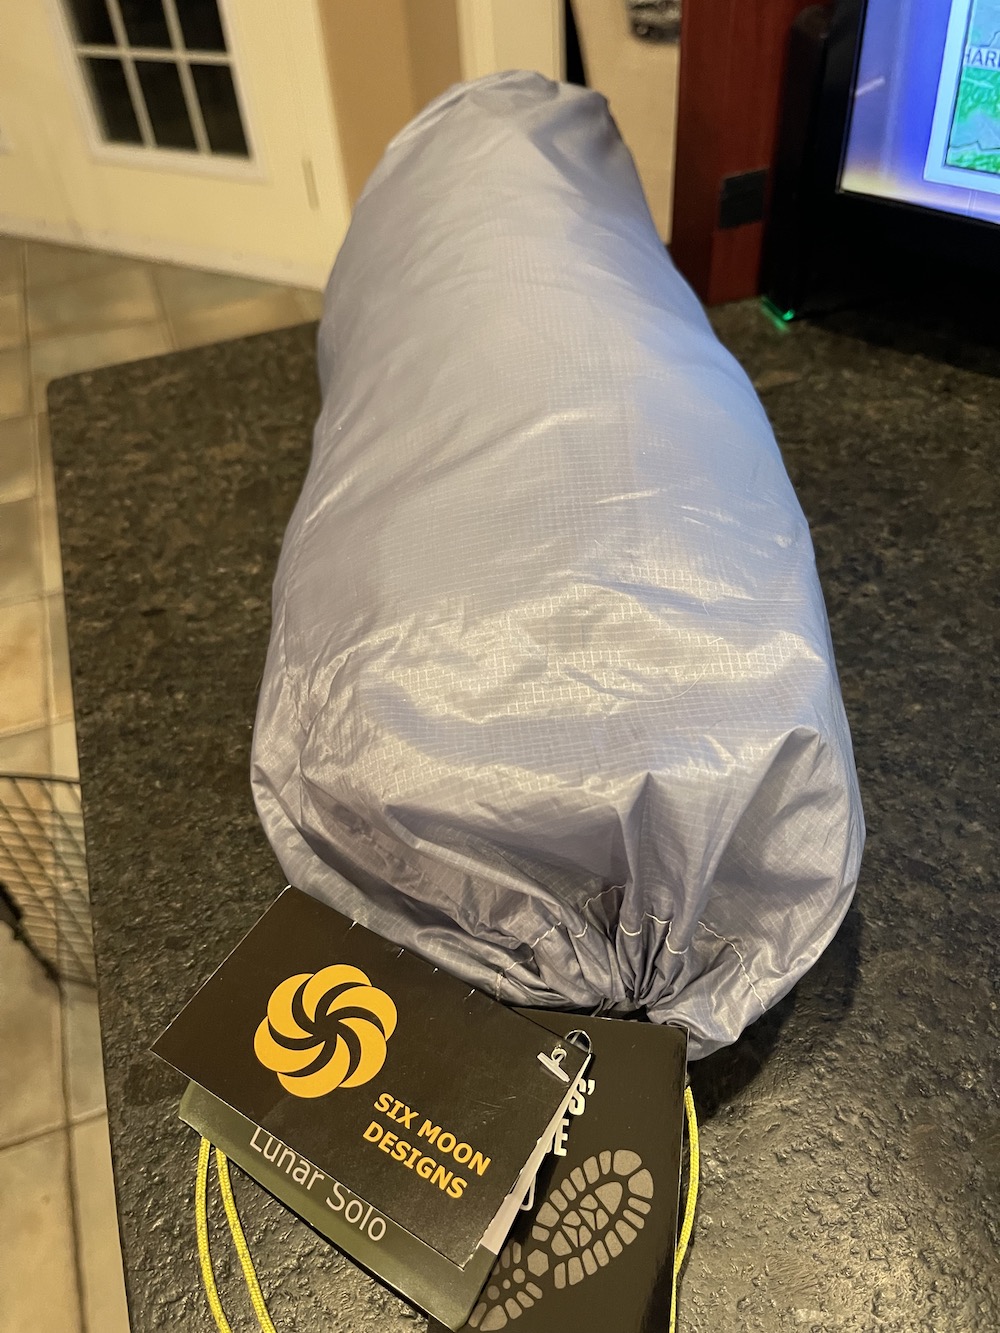 New Lunar Solo Tent Six Moon Designs - Seam Sealed - Backpacking Light